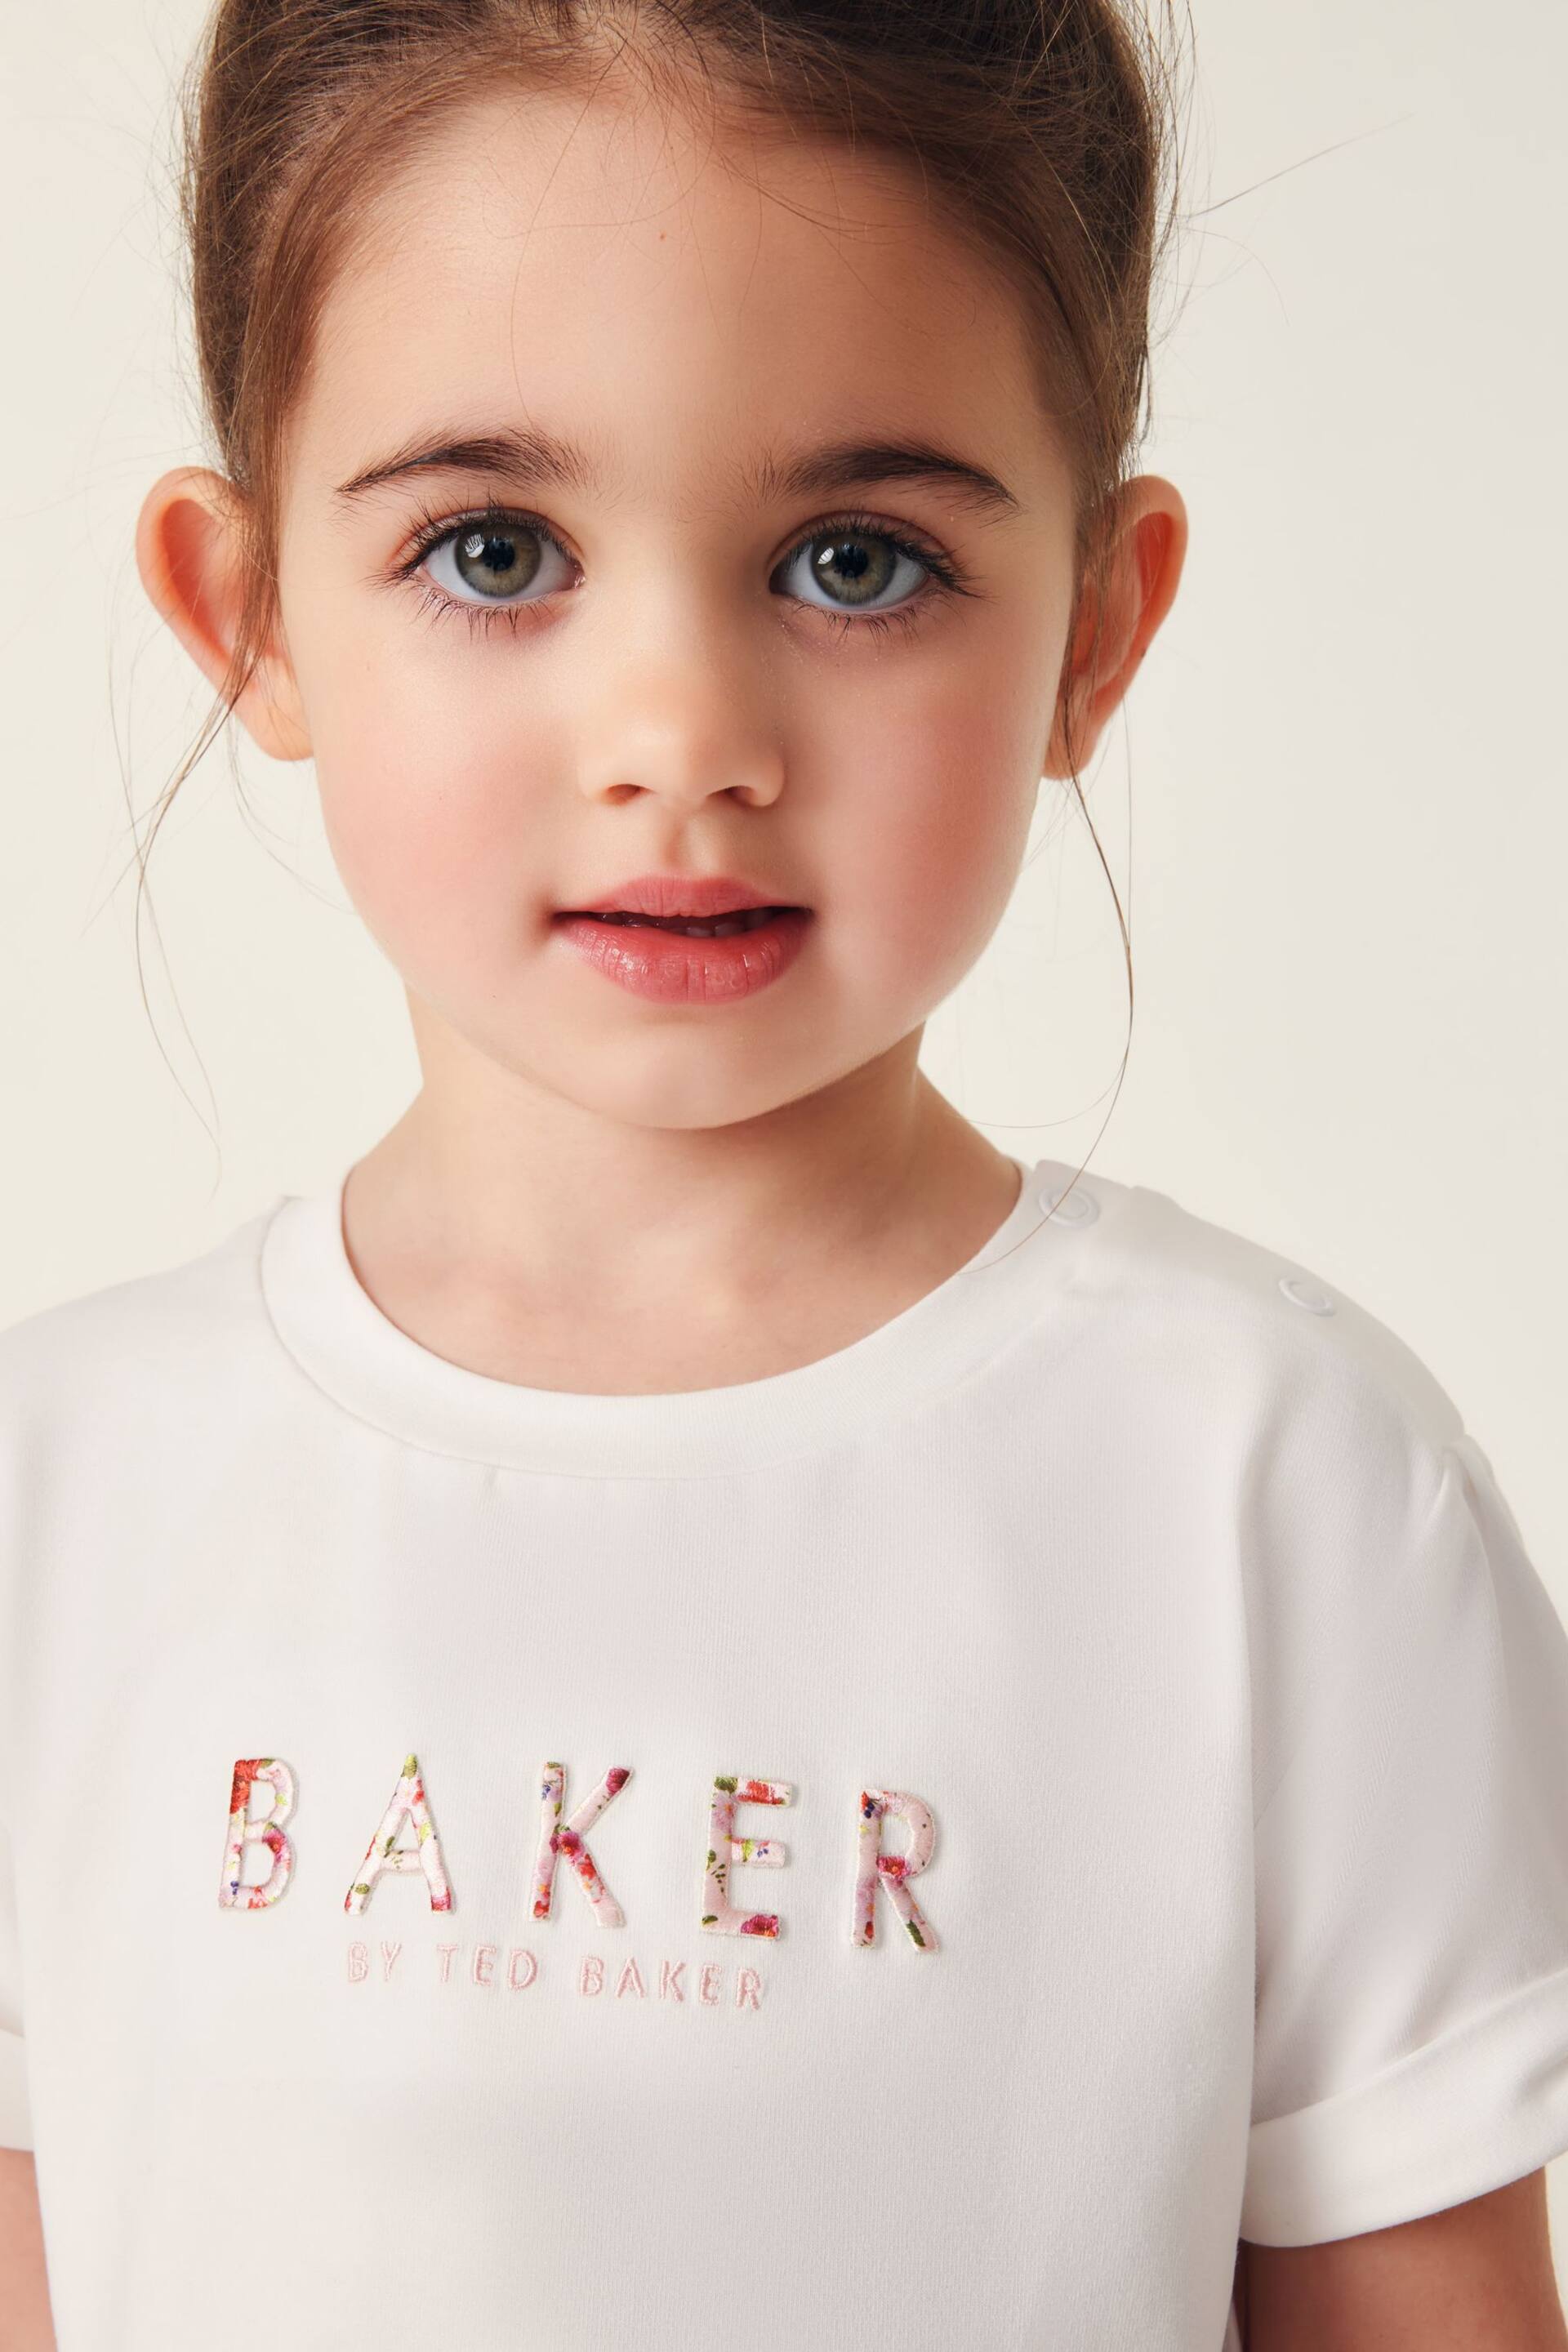 Baker by Ted Baker Organza Peplum T-Shirt and Legging Set - Image 5 of 12